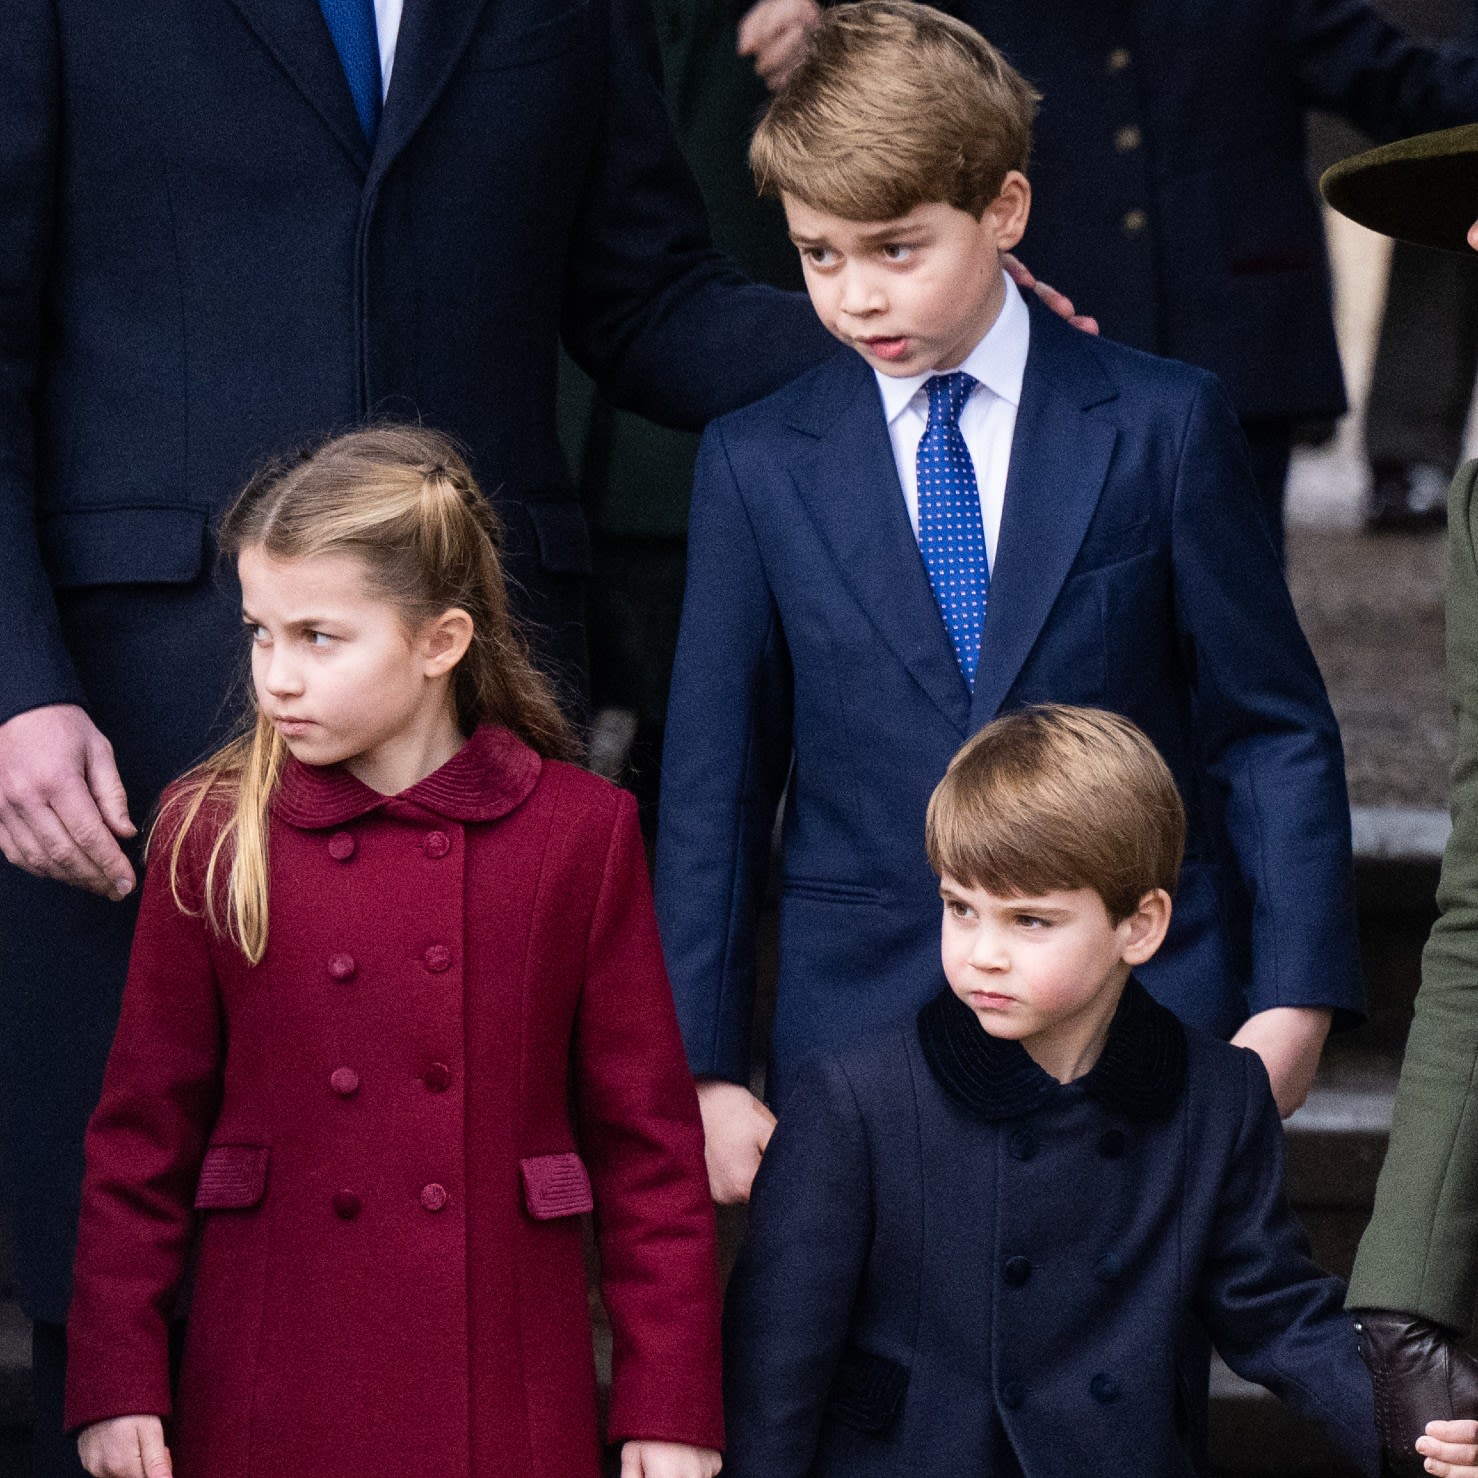 Prince George, Princess Charlotte, and Prince Louis Would Be Required to Take Part In National Service If It Passes...